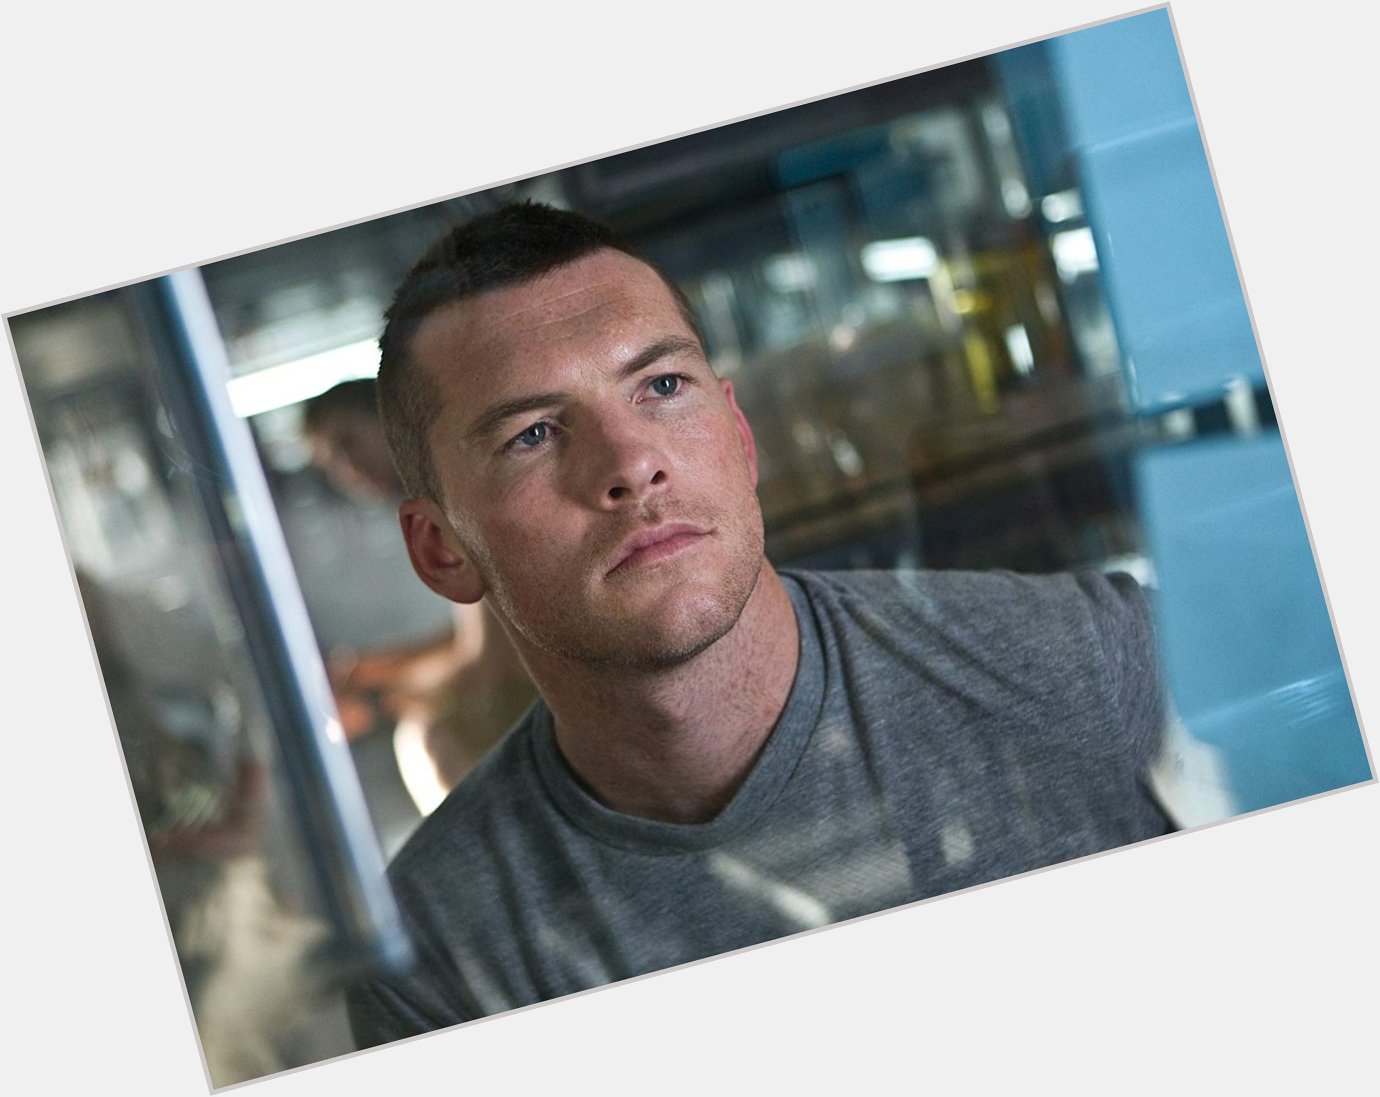 Happy Birthday to Sam Worthington! What is your favourite film with Sam?  